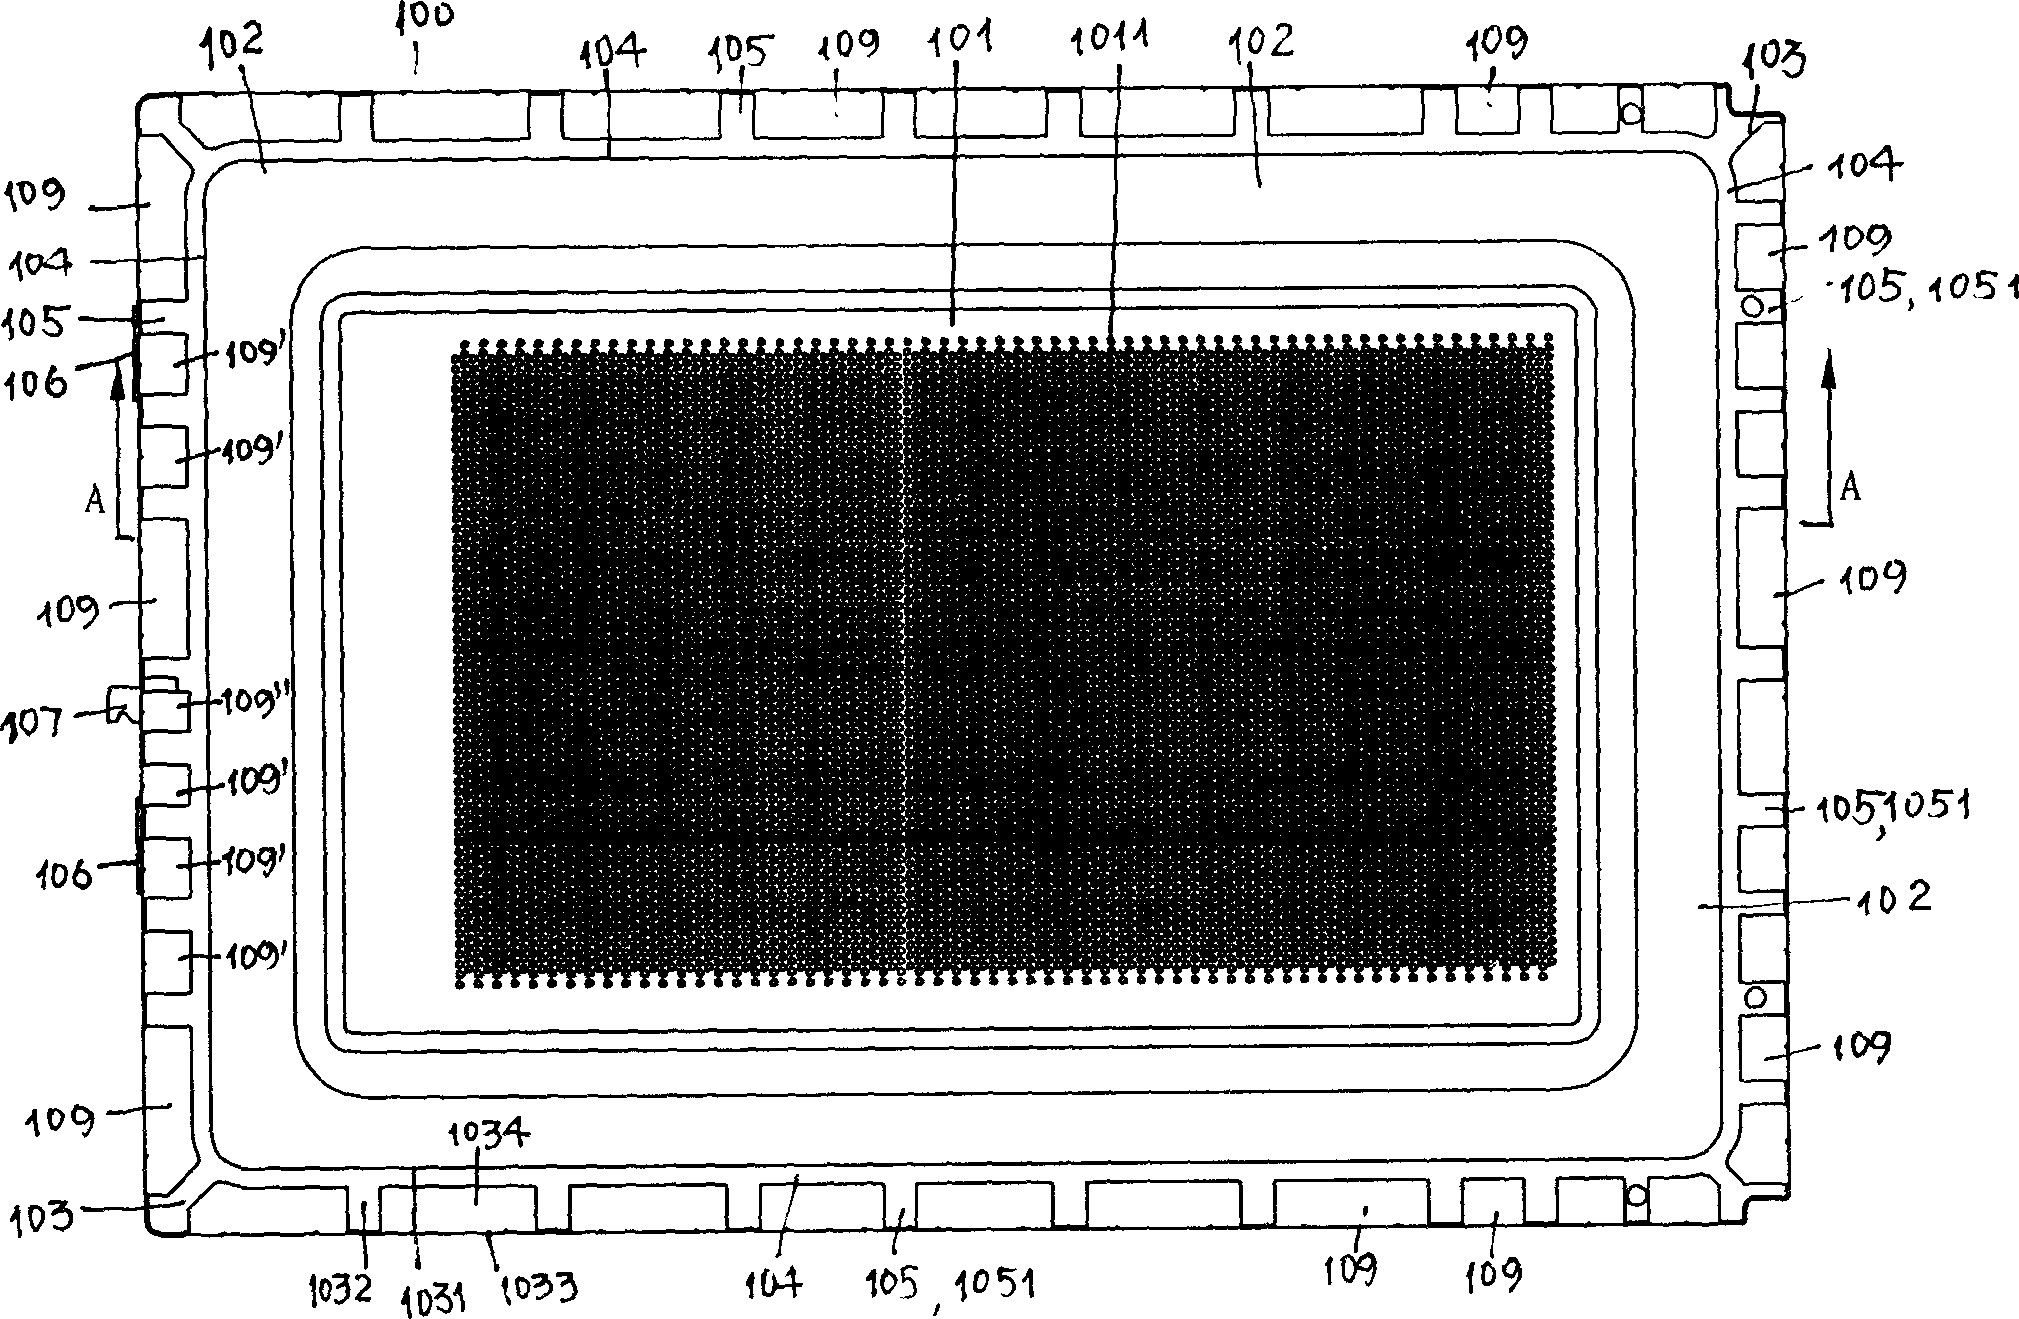 Door of microwave oven with structure for preventing microwave leakage